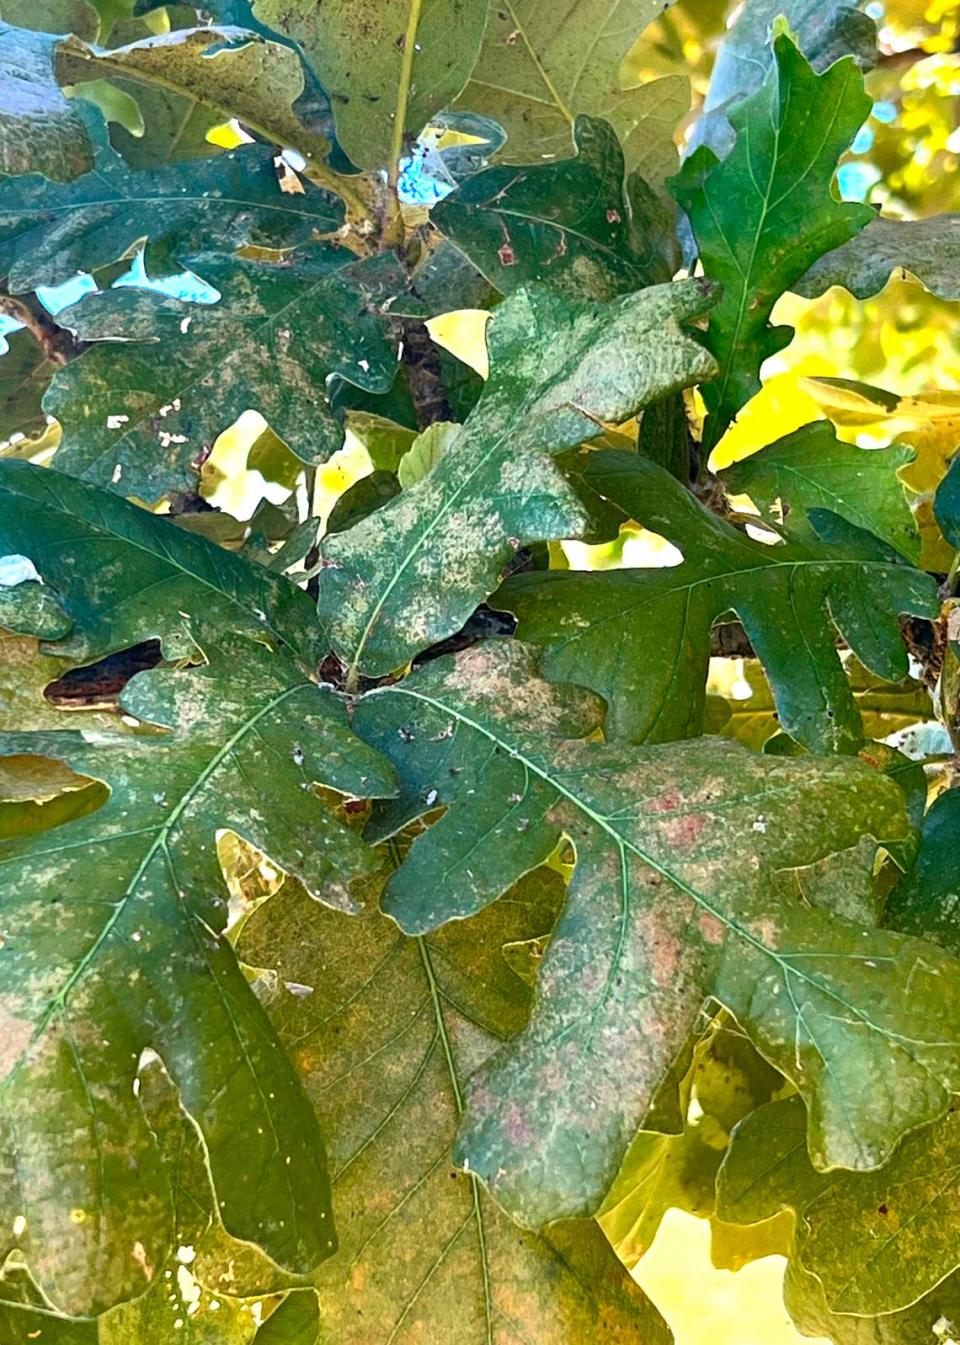 Lace bug damage as it appears on top surfaces of bur oak leaves.